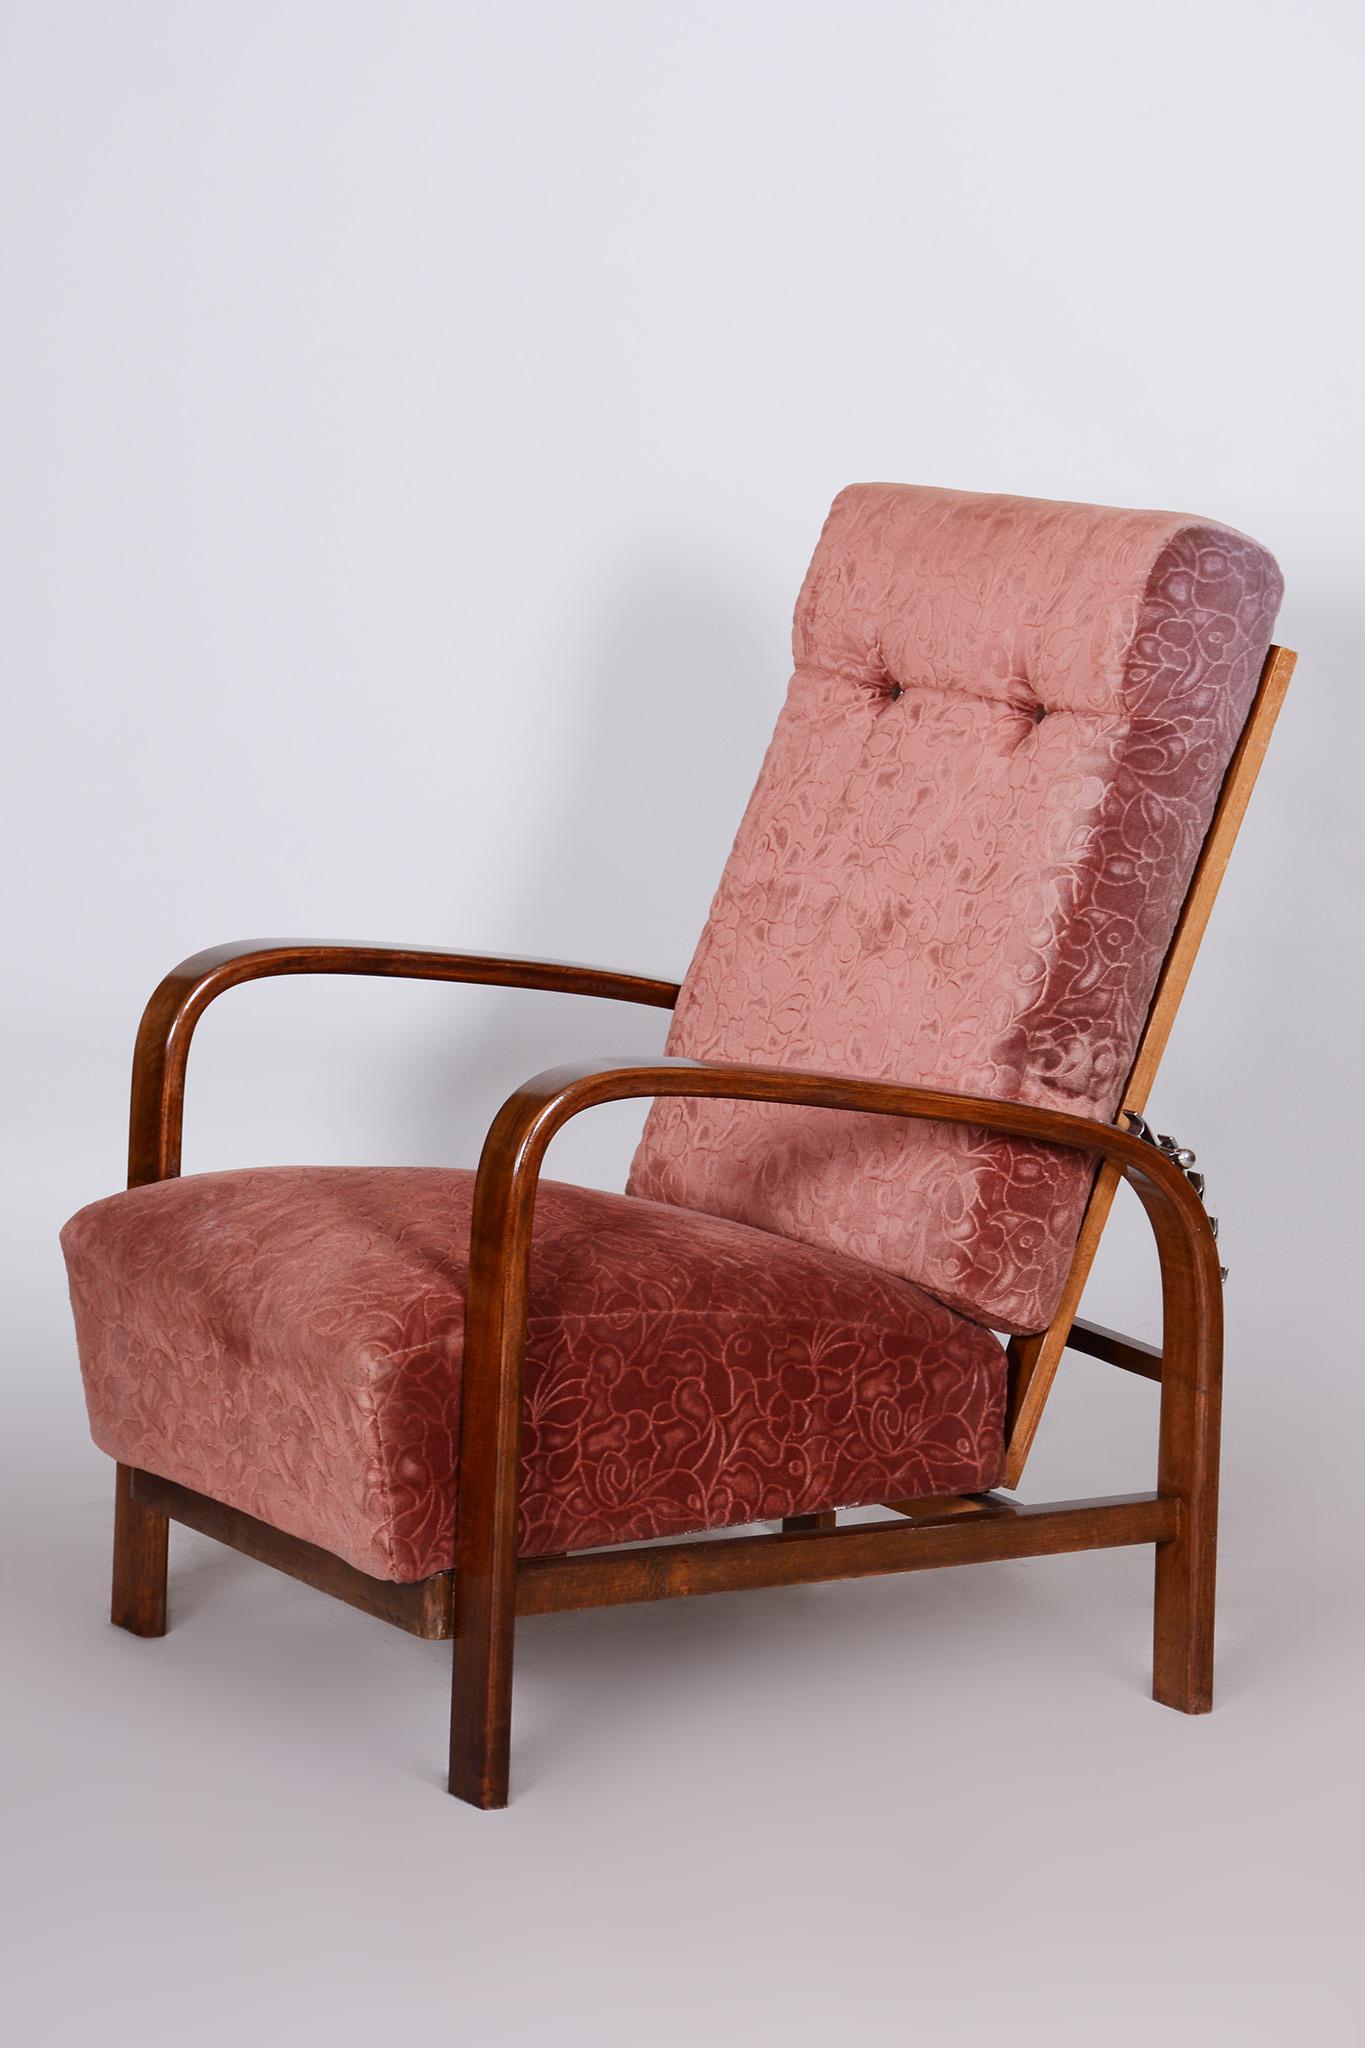 Restored Art Deco Positioning Armchair, Beech Solid Wood, Walnut, 1930s, Czechia In Good Condition For Sale In Horomerice, CZ